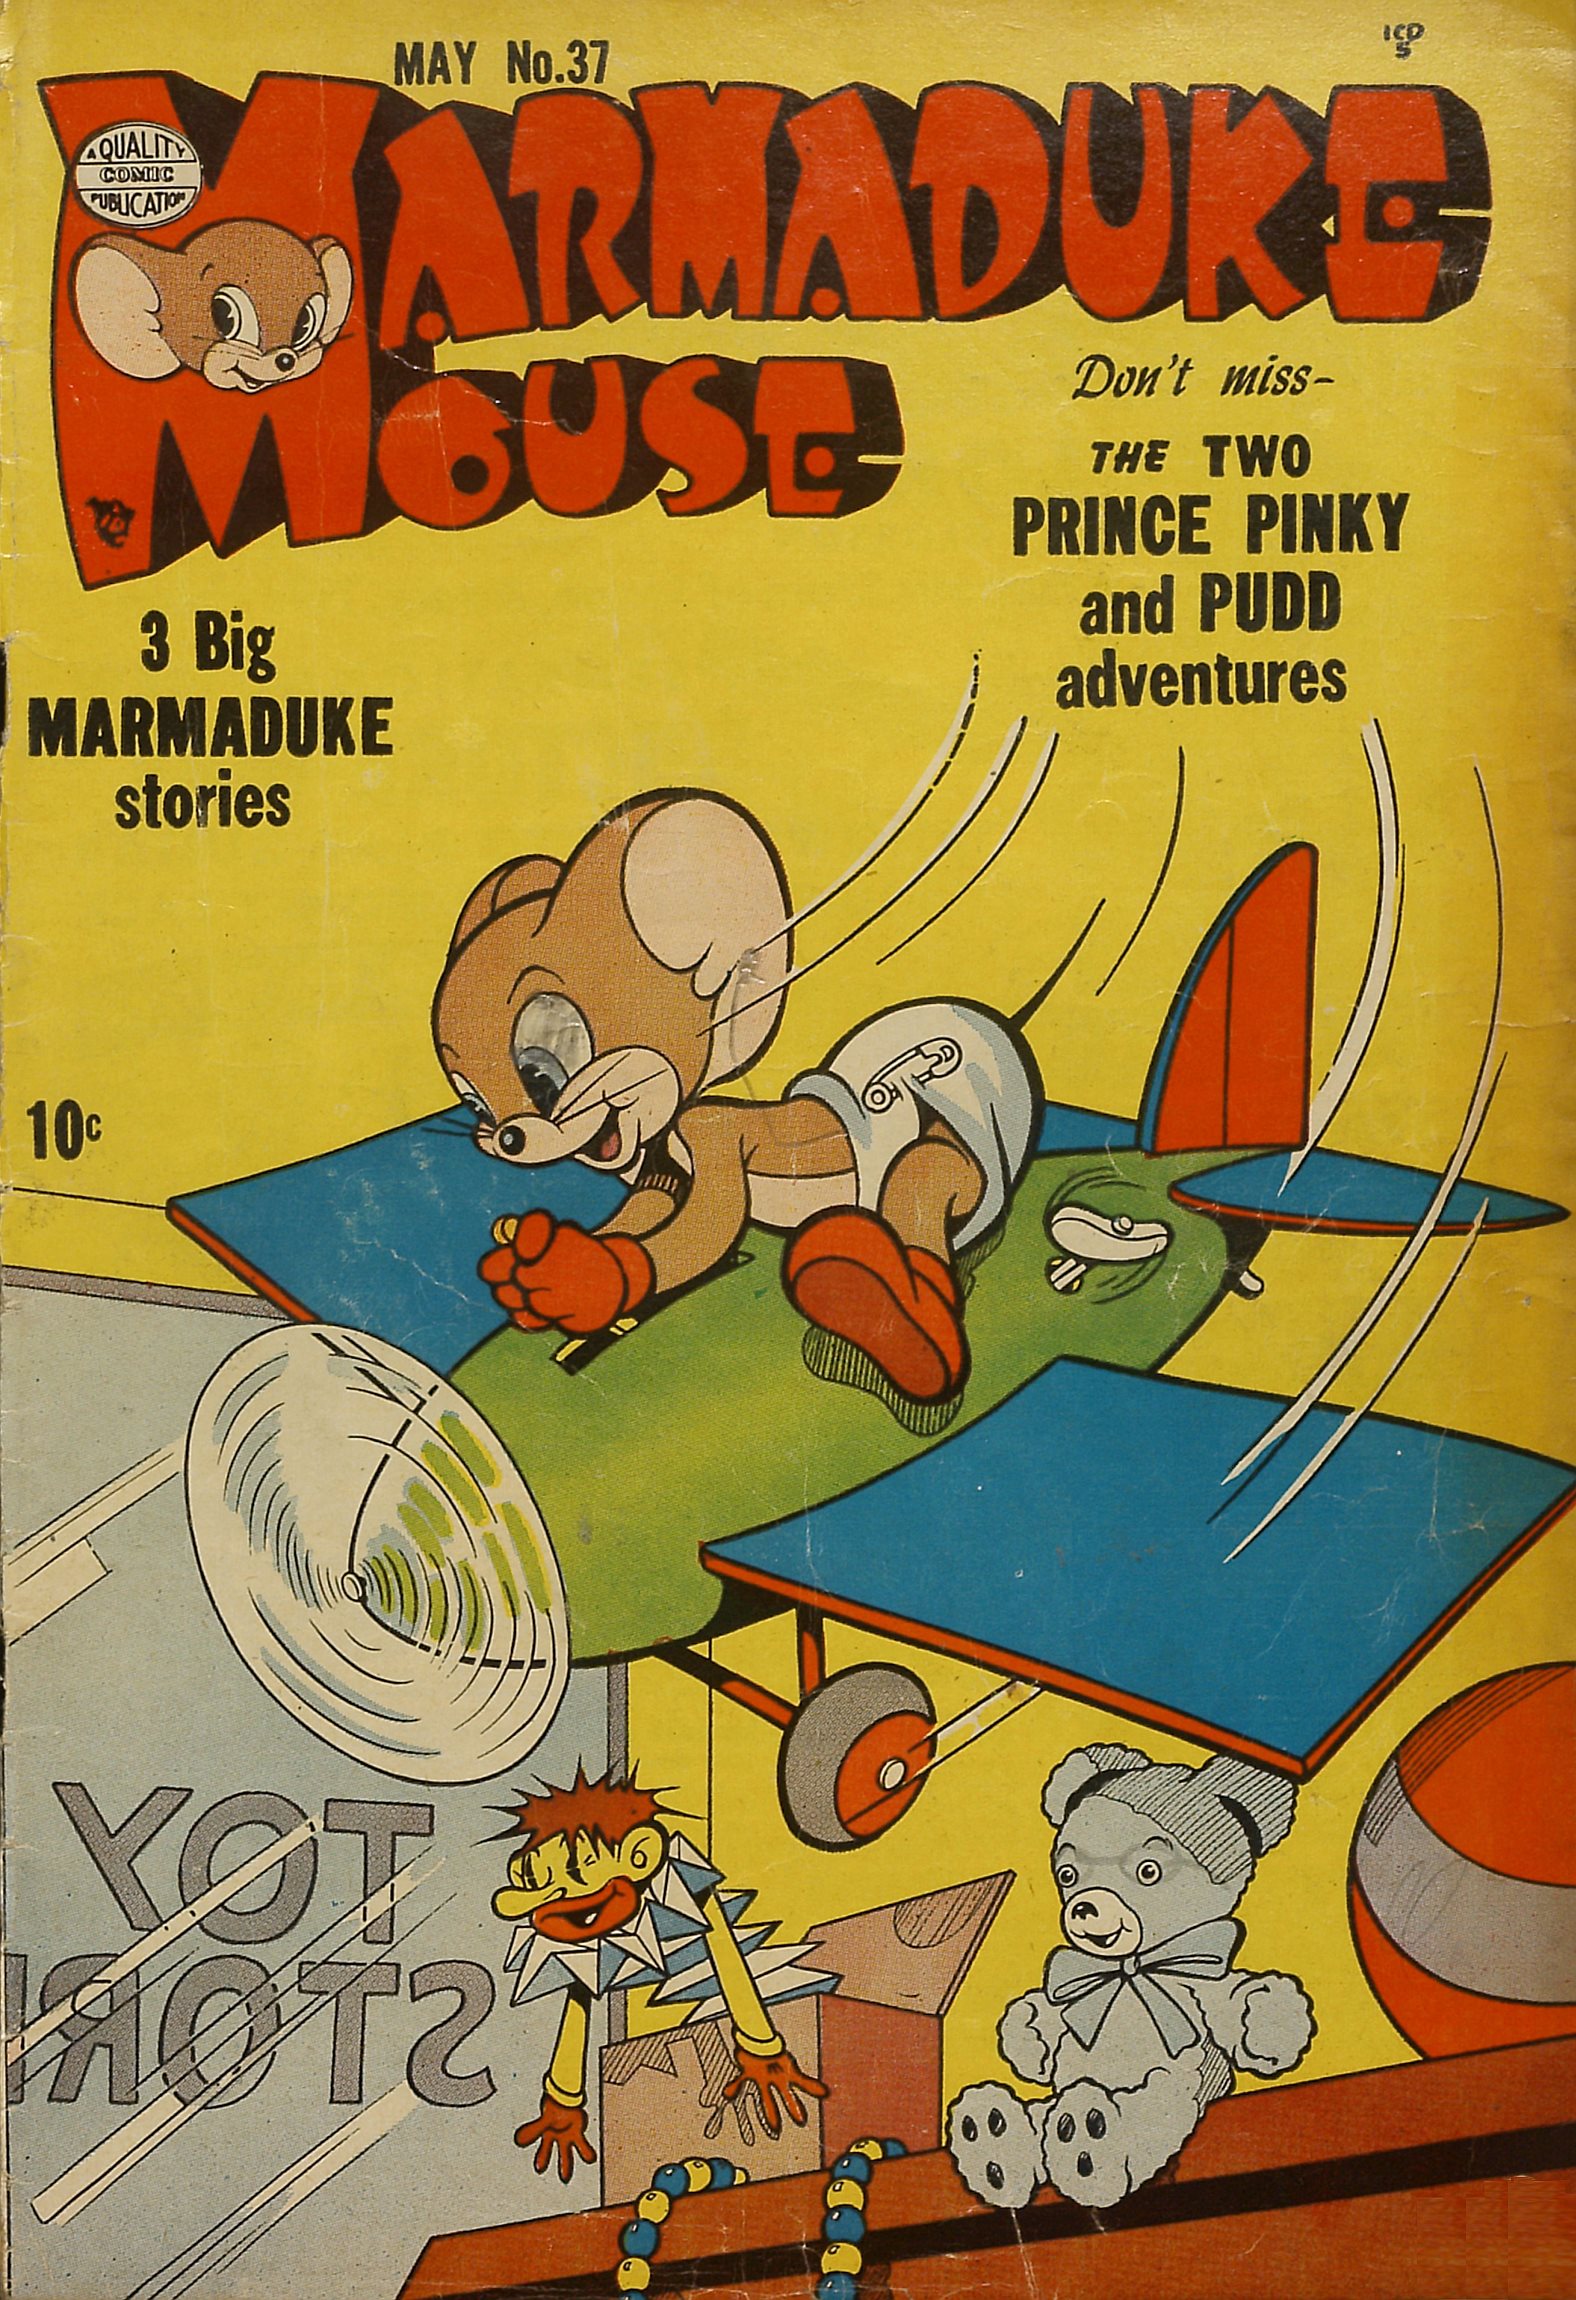 Read online Marmaduke Mouse comic -  Issue #37 - 1